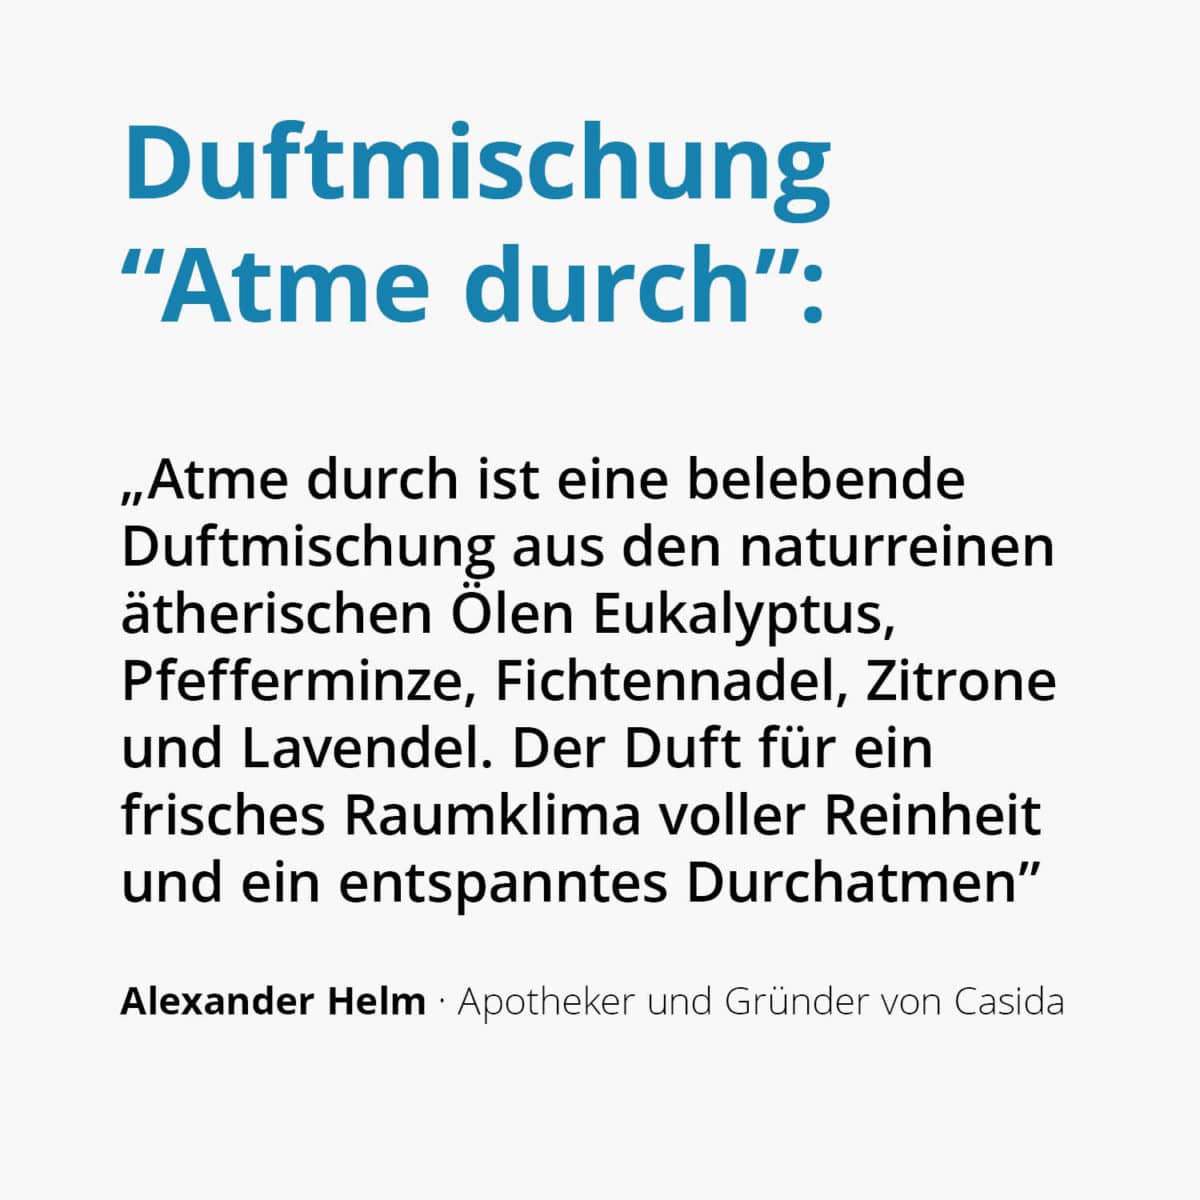 Duftmischung Atme durch